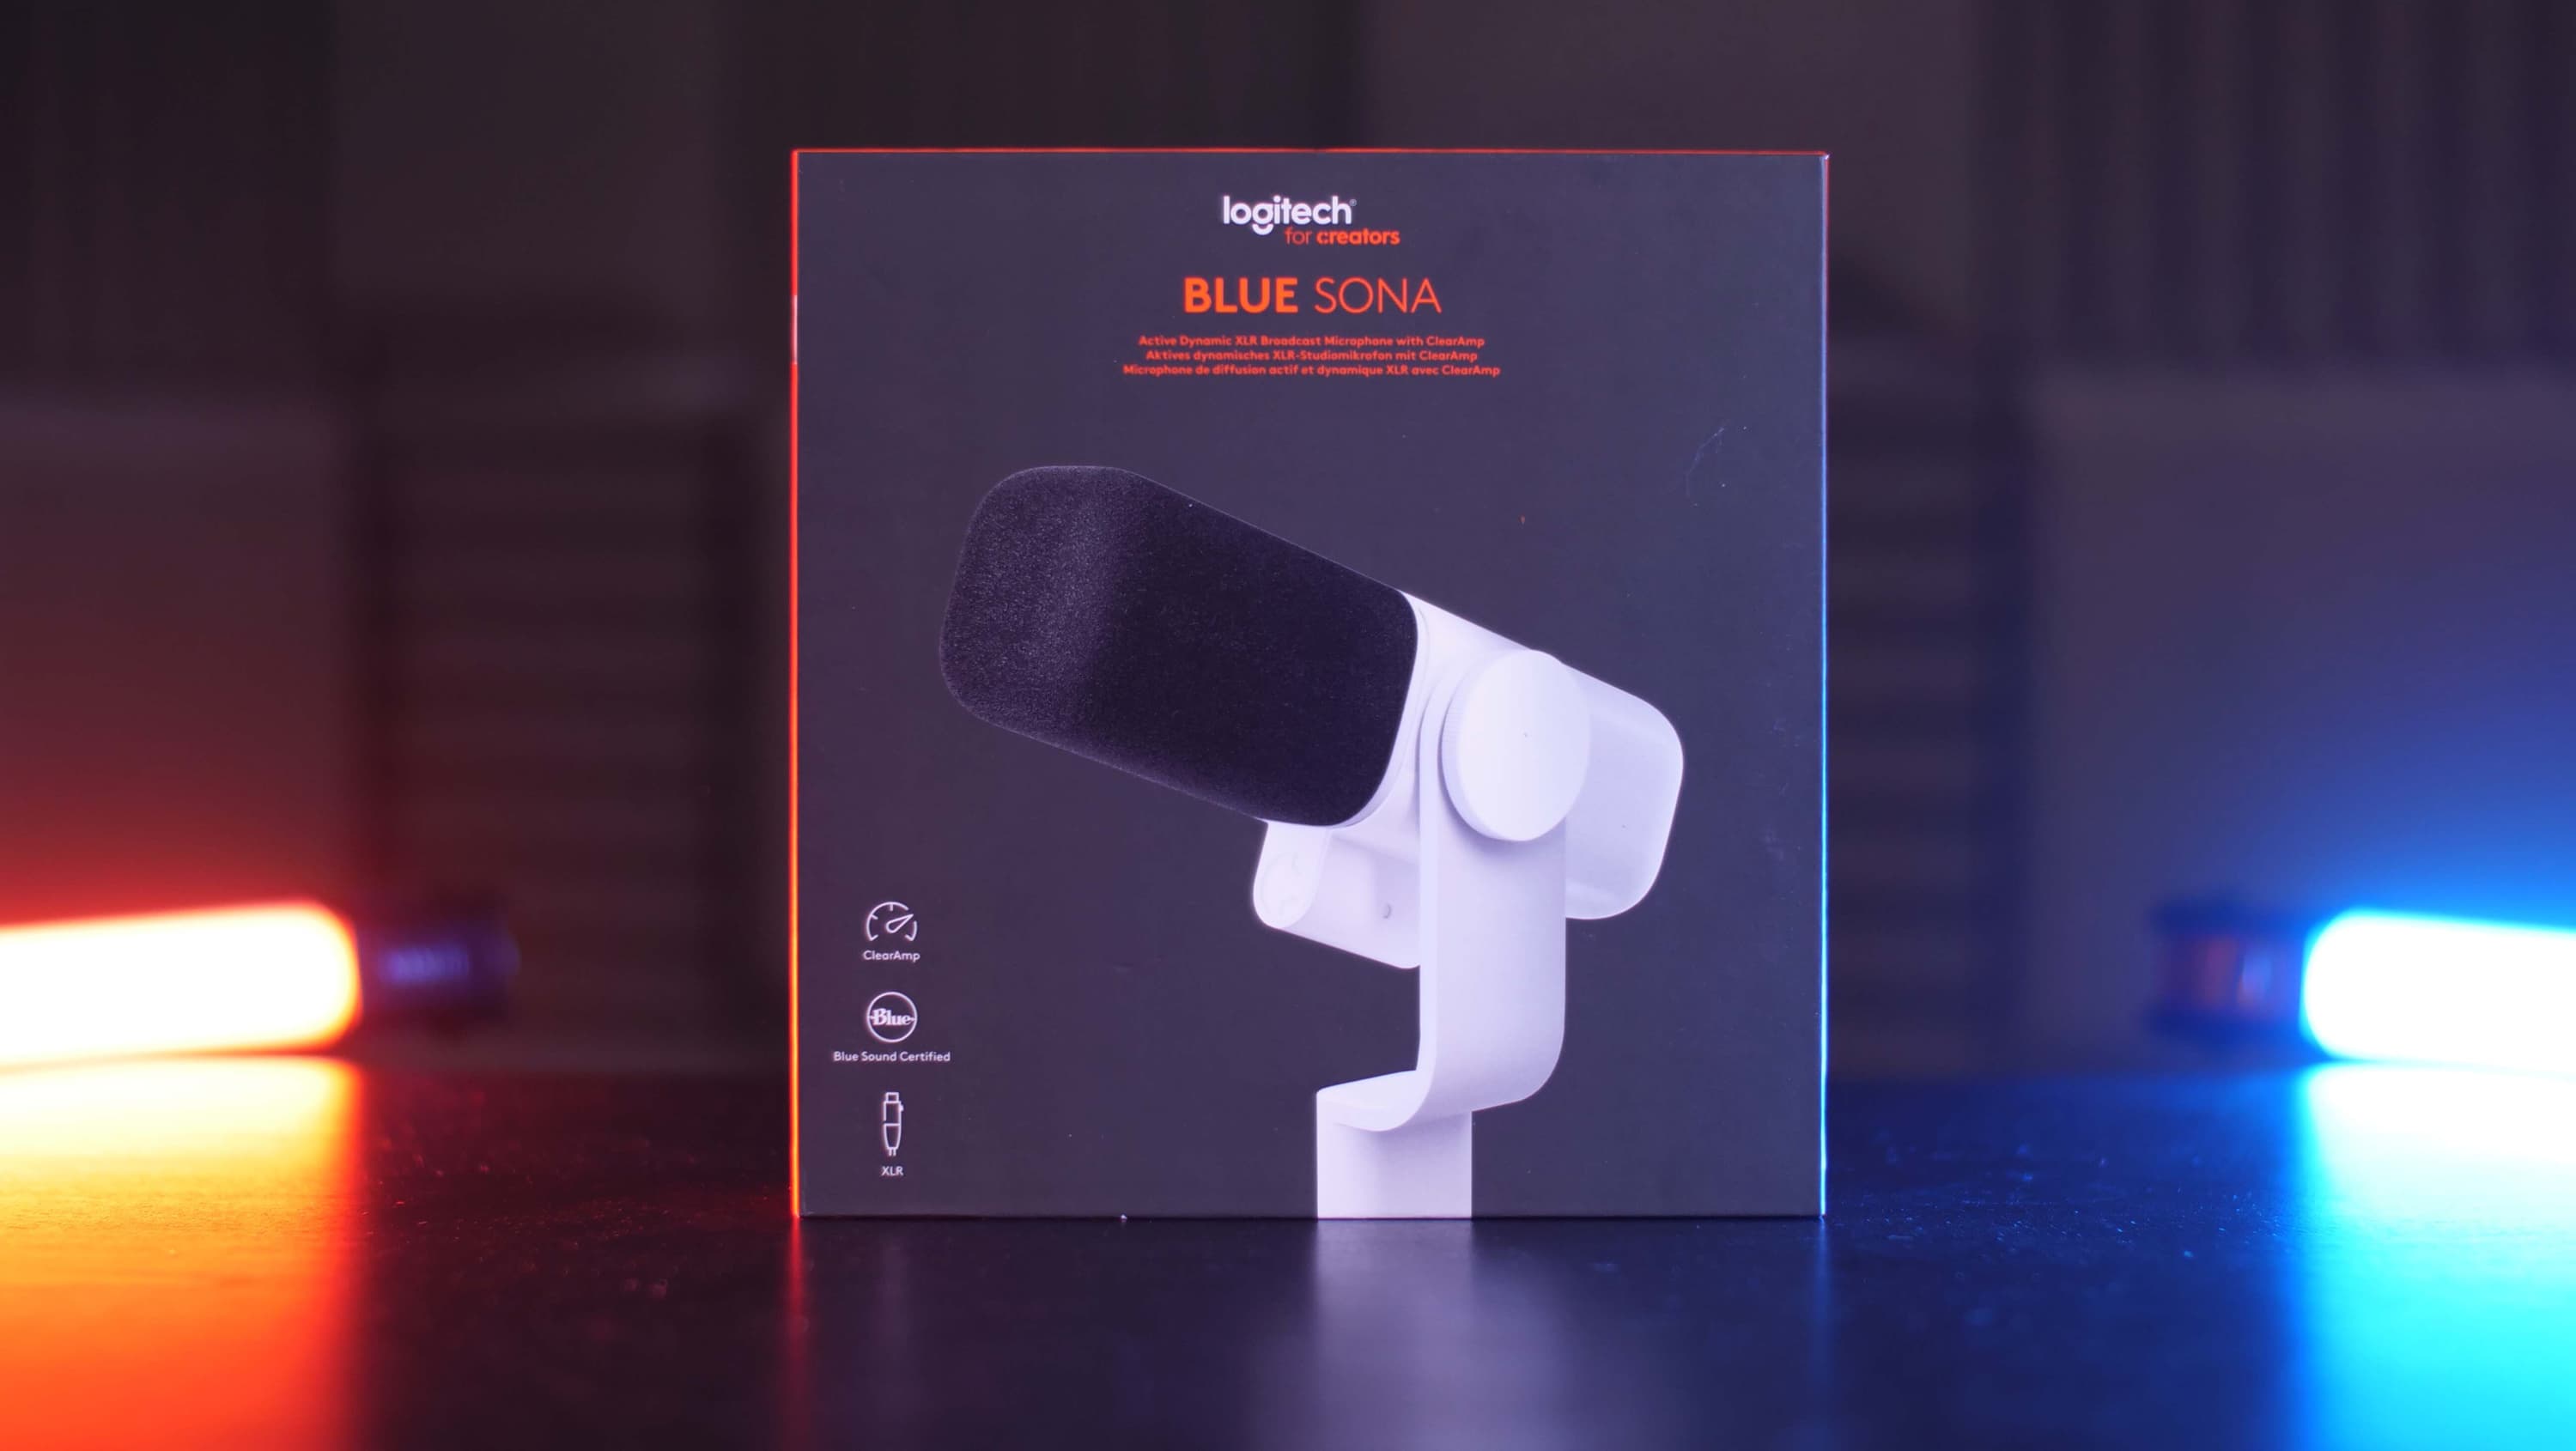 A Blue Sona Microphone box standing up right on a table.